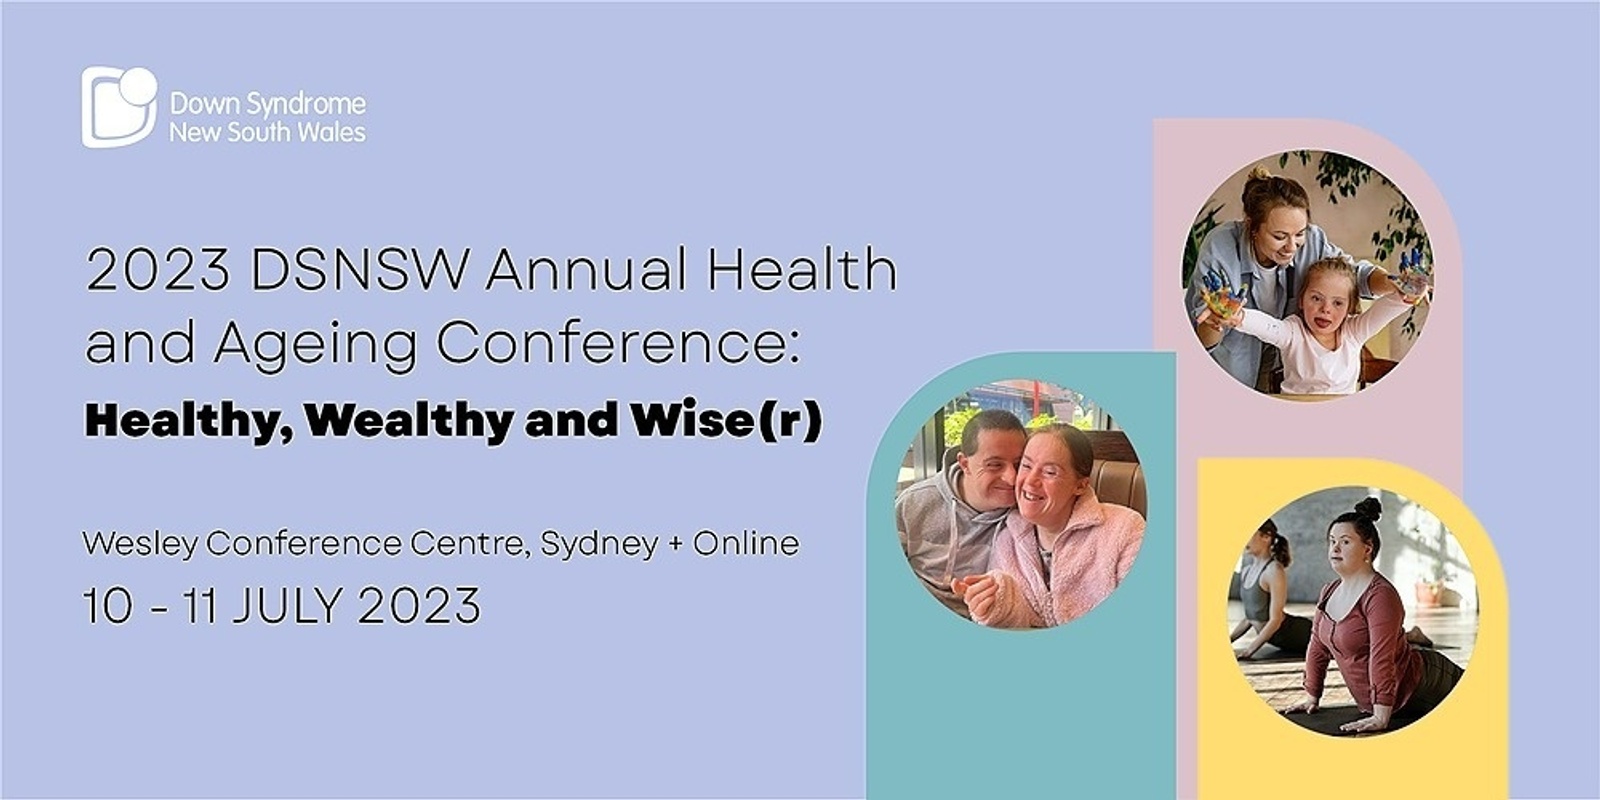 DSNSW Annual Health and Ageing Conference: Healthy, Wealthy and Wise(r)